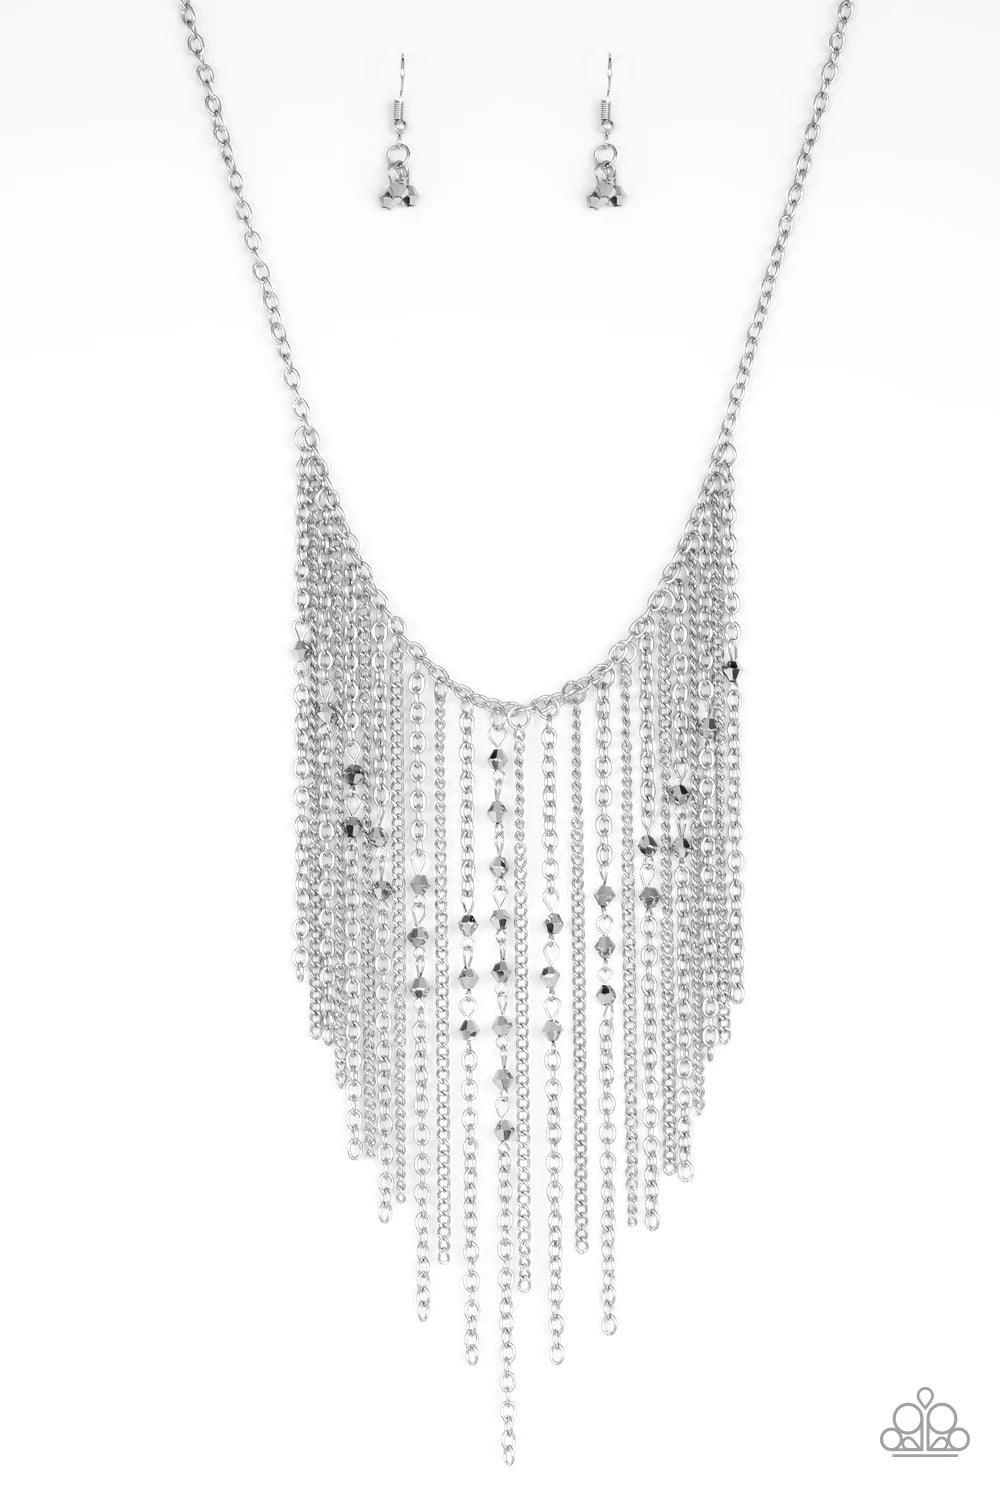 Paparazzi Accessories First Class Fringe - Silver Varying in length, mismatched silver chains stream from the bottom of a classic silver chain. Faceted hematite crystal-like beads sporadically dot the free-falling chains, creating a statement-making fring